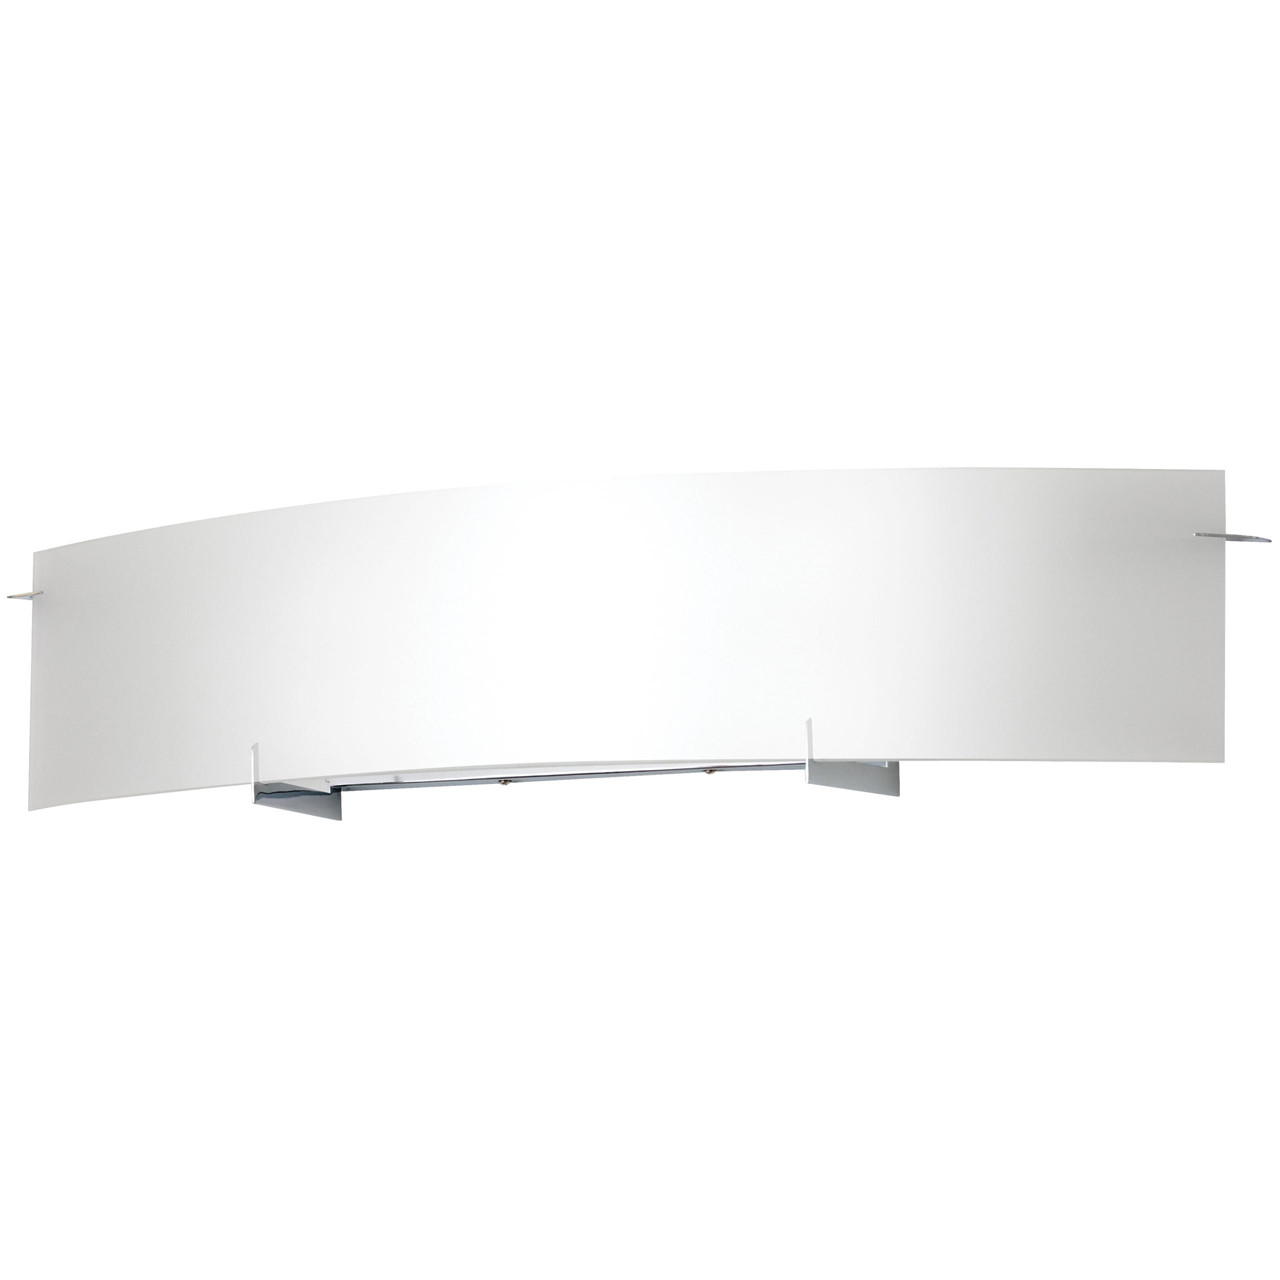 34"W Polished Chrome Vanity Light with Frosted Glass Shade